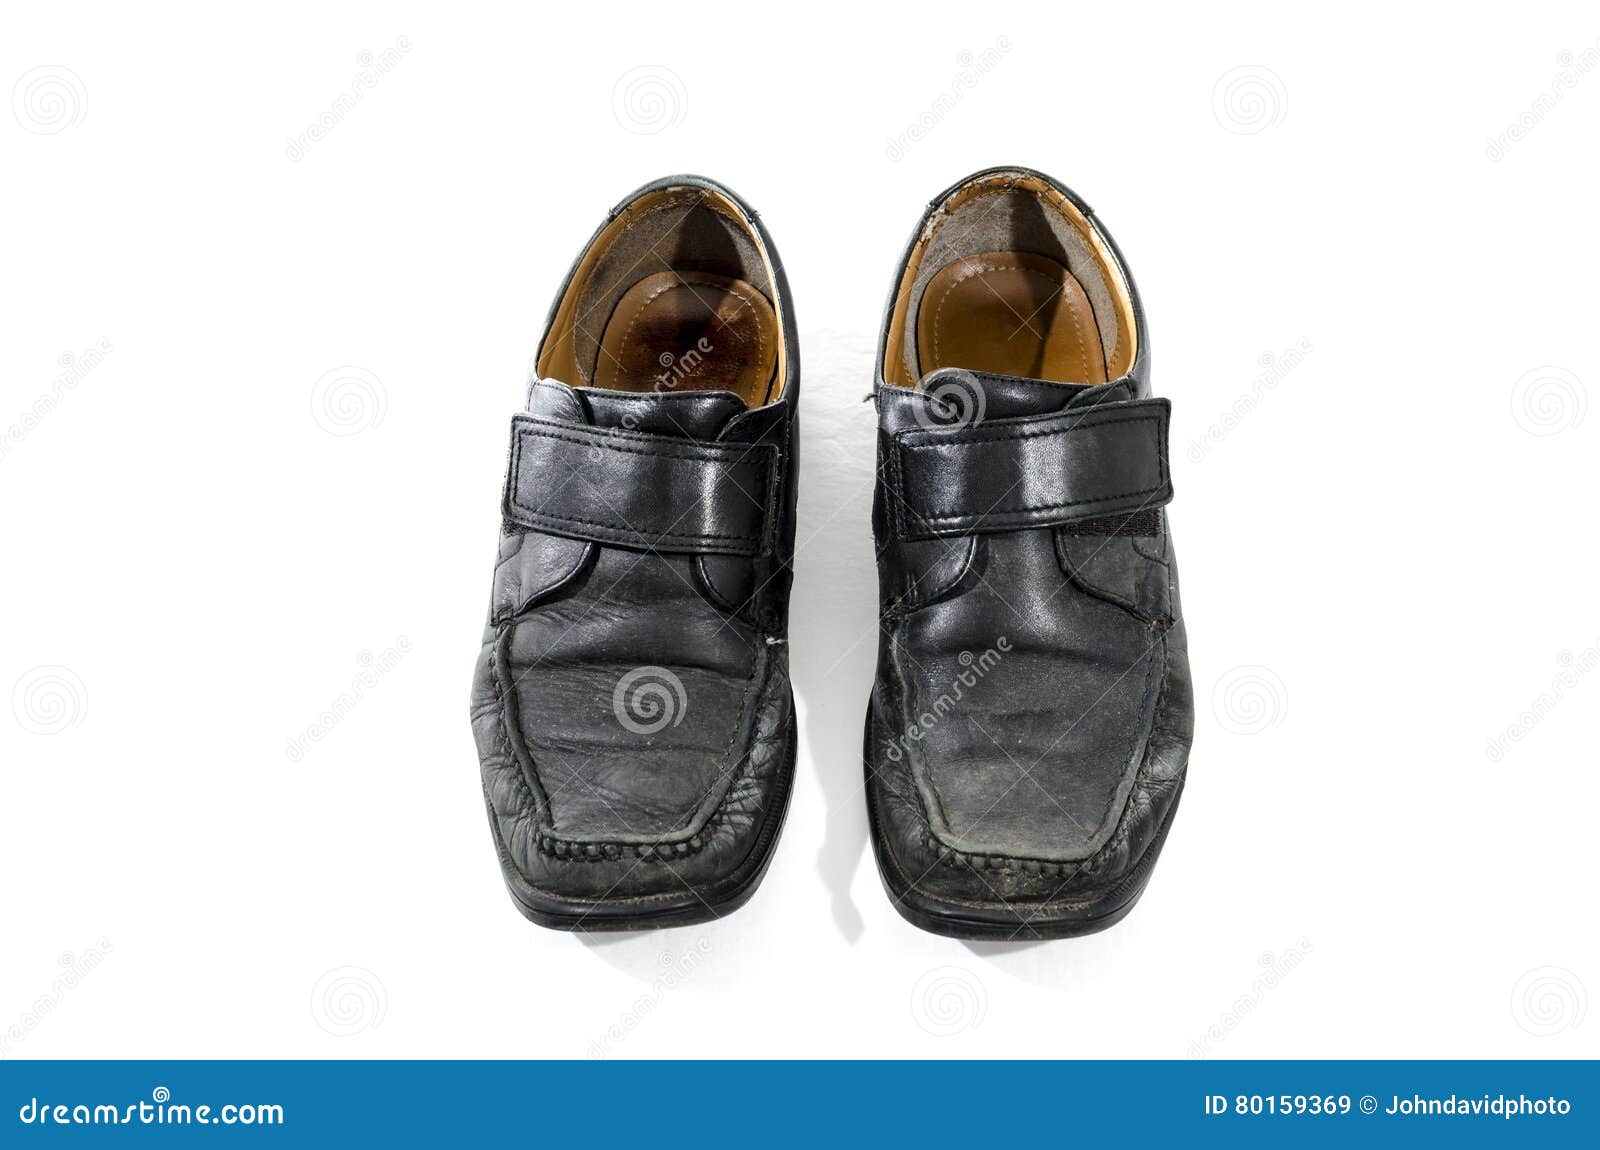 Old Used and Worn Black Leather Shoes Stock Image - Image of tied, mans ...